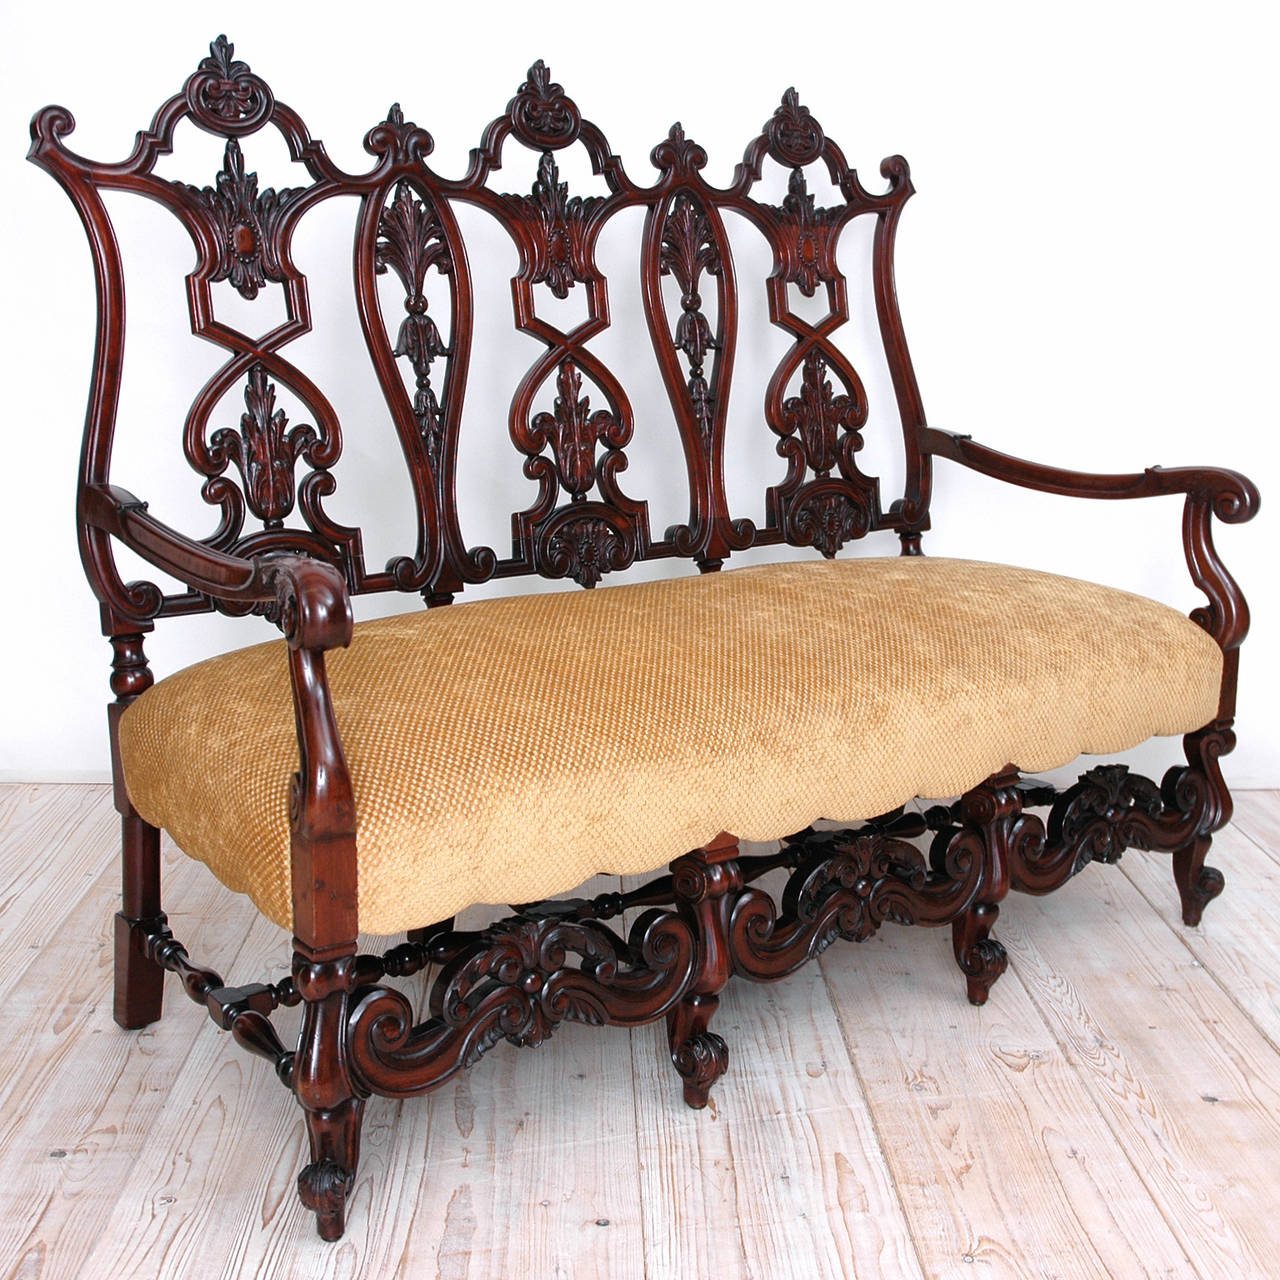 An exceptionally beautiful settee with upholstered seat and carved mahogany frame embellished with acanthus and fleur-de-lys motifs, carved scroll arms and escargot feet. Seat is upholstered in gold-colored chenille fabric, American, circa